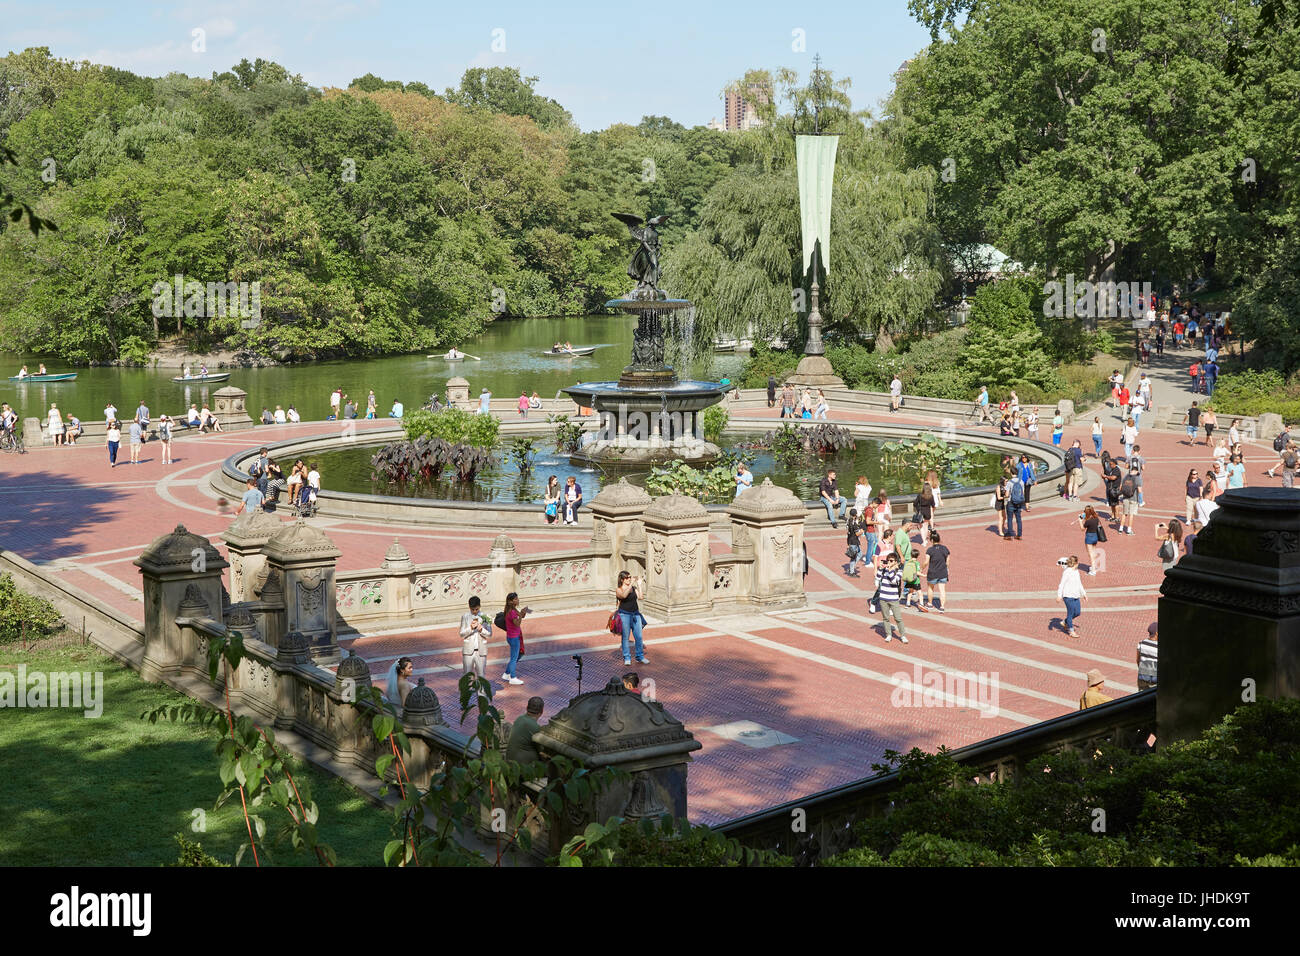 Bethesda Fountain with people view from the terrace in Central Park in a sunny day in New York Stock Photo